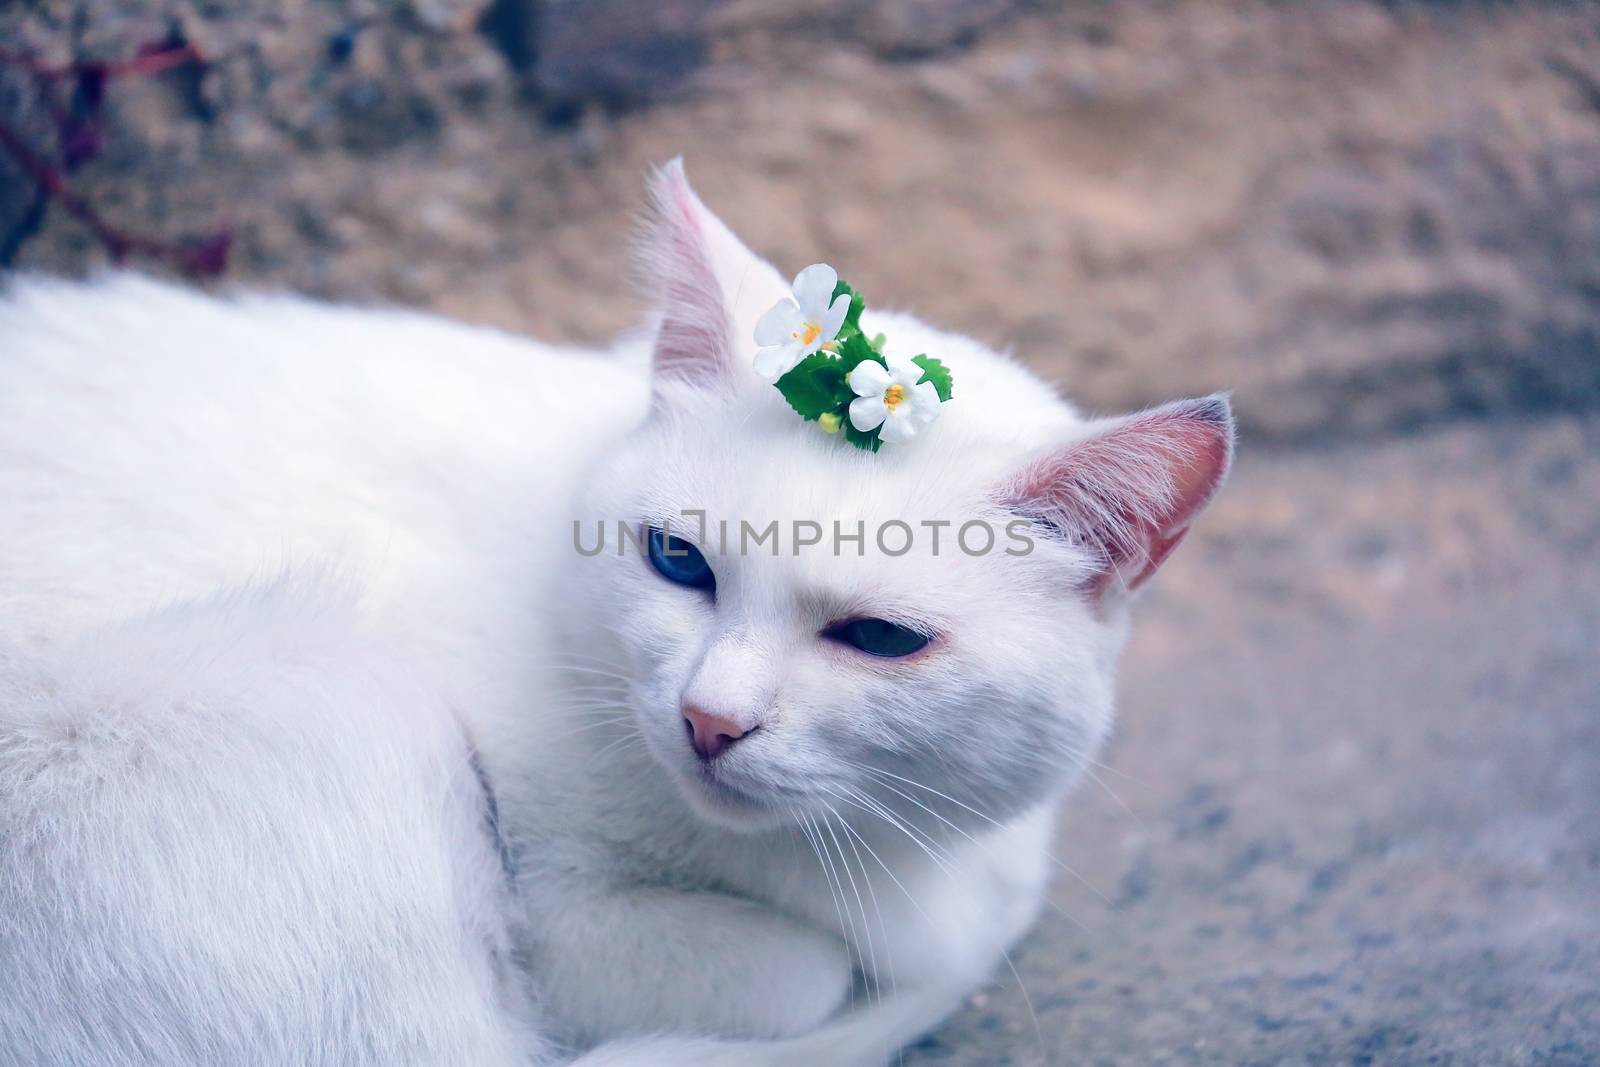 Beautiful White Cat with a Flower on her Head